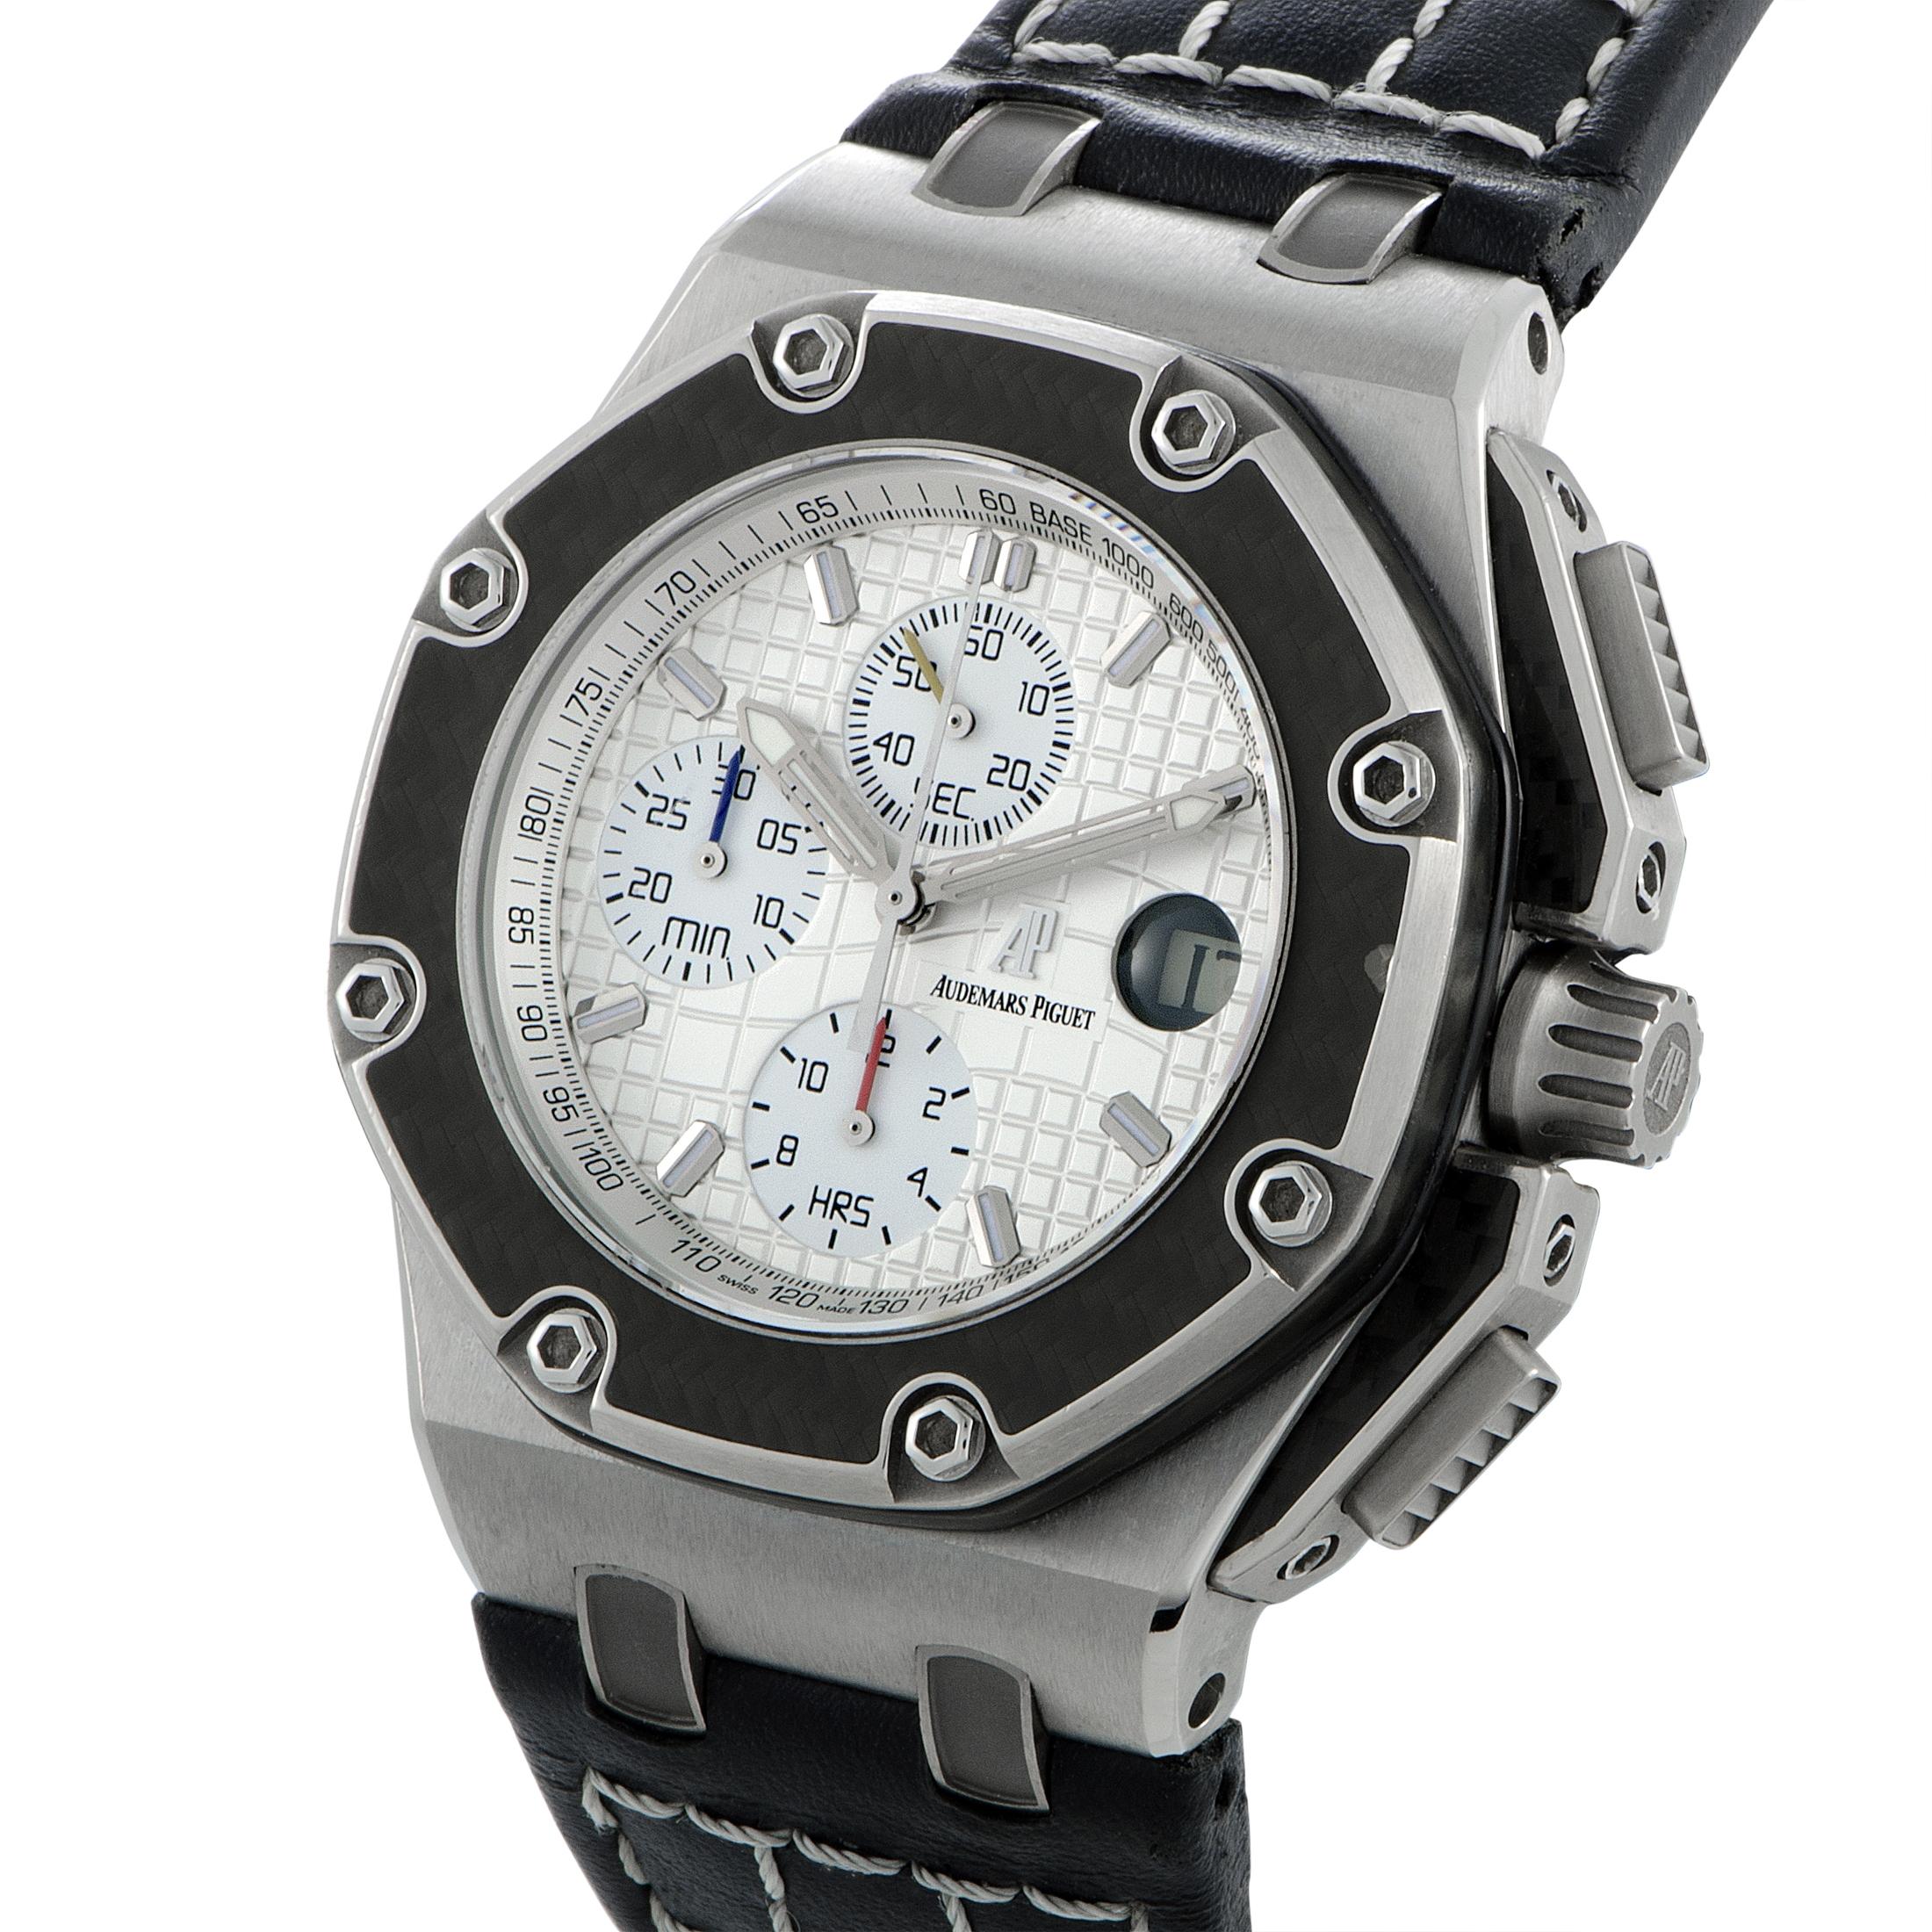 A perfectly fitting aesthetic setting for a model of resolute sporty spirit, the highly renowned and remarkably robust “Royal Oak Offshore” design exudes technical excellence and modern style in this fantastic wristwatch from Audemars Piguet which